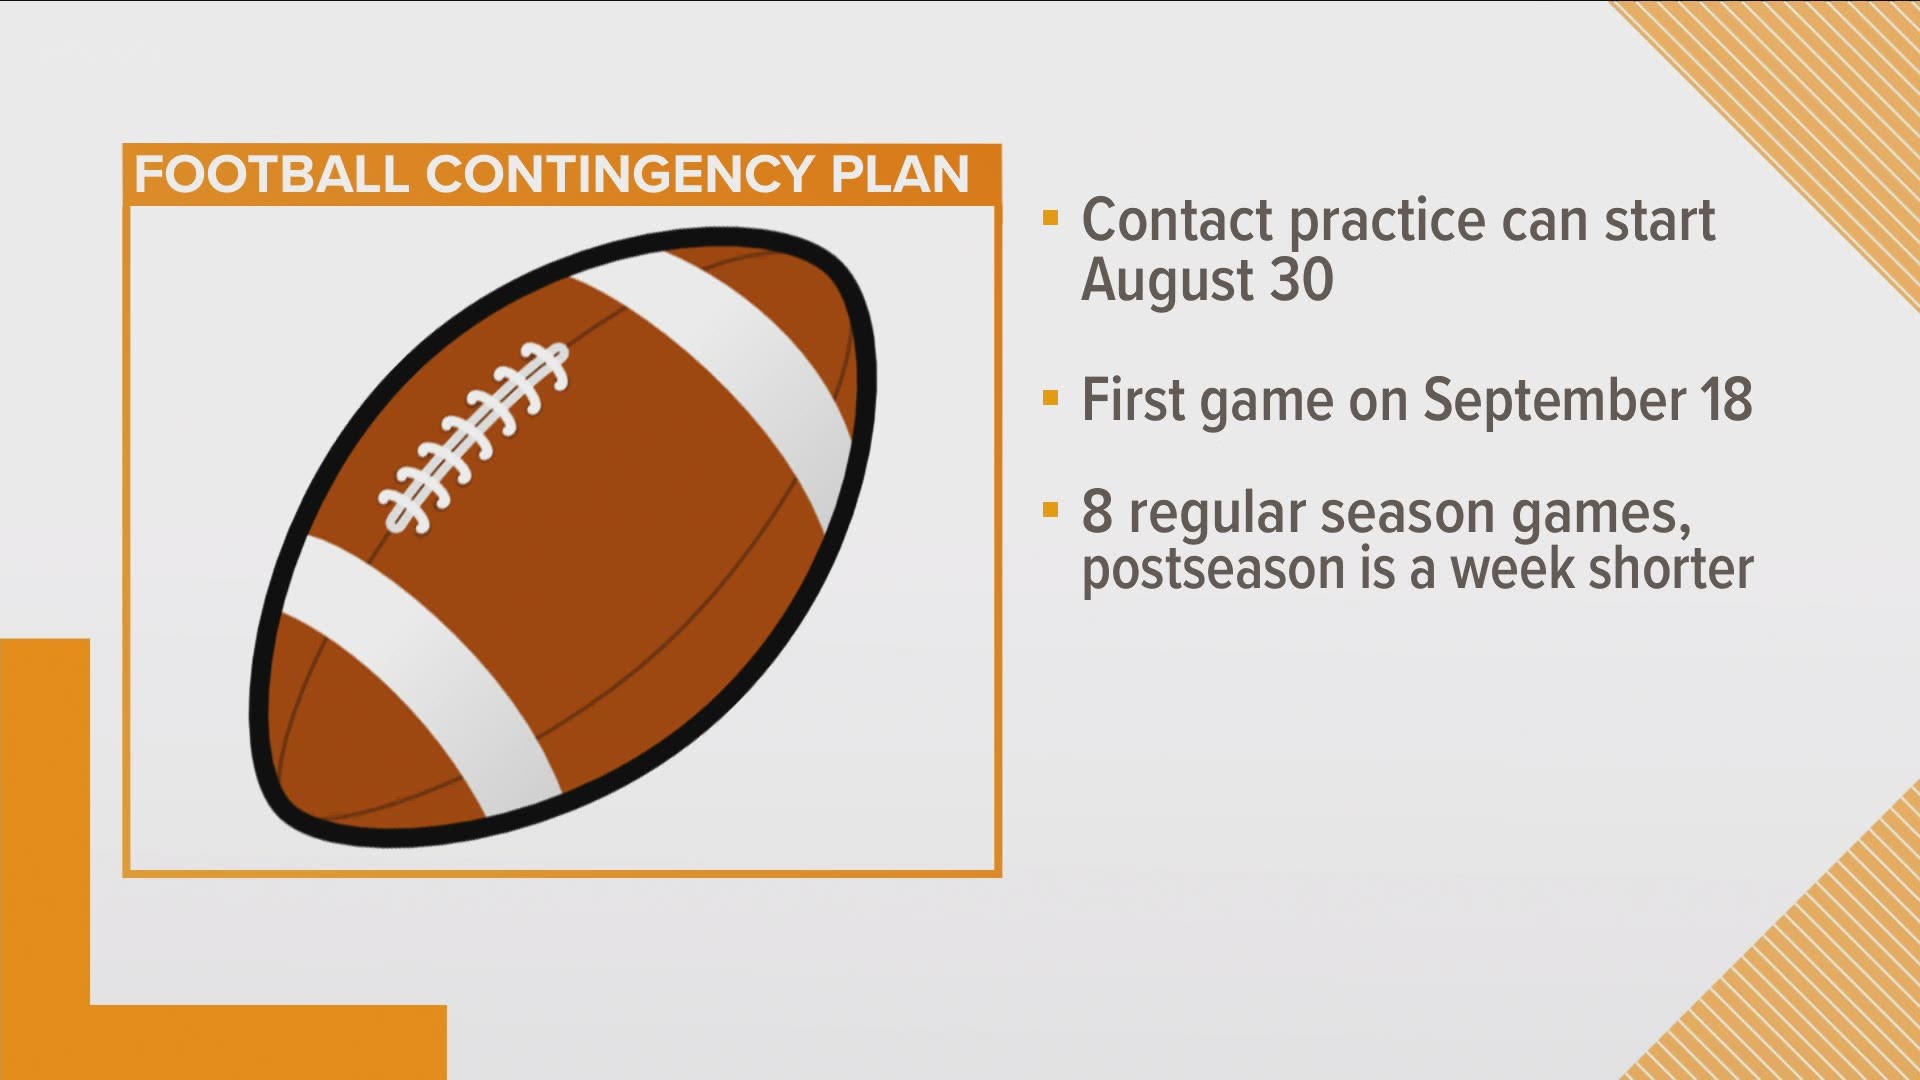 Here's a look at the contingency plan for girls' soccer and high school football from the TSSAA.